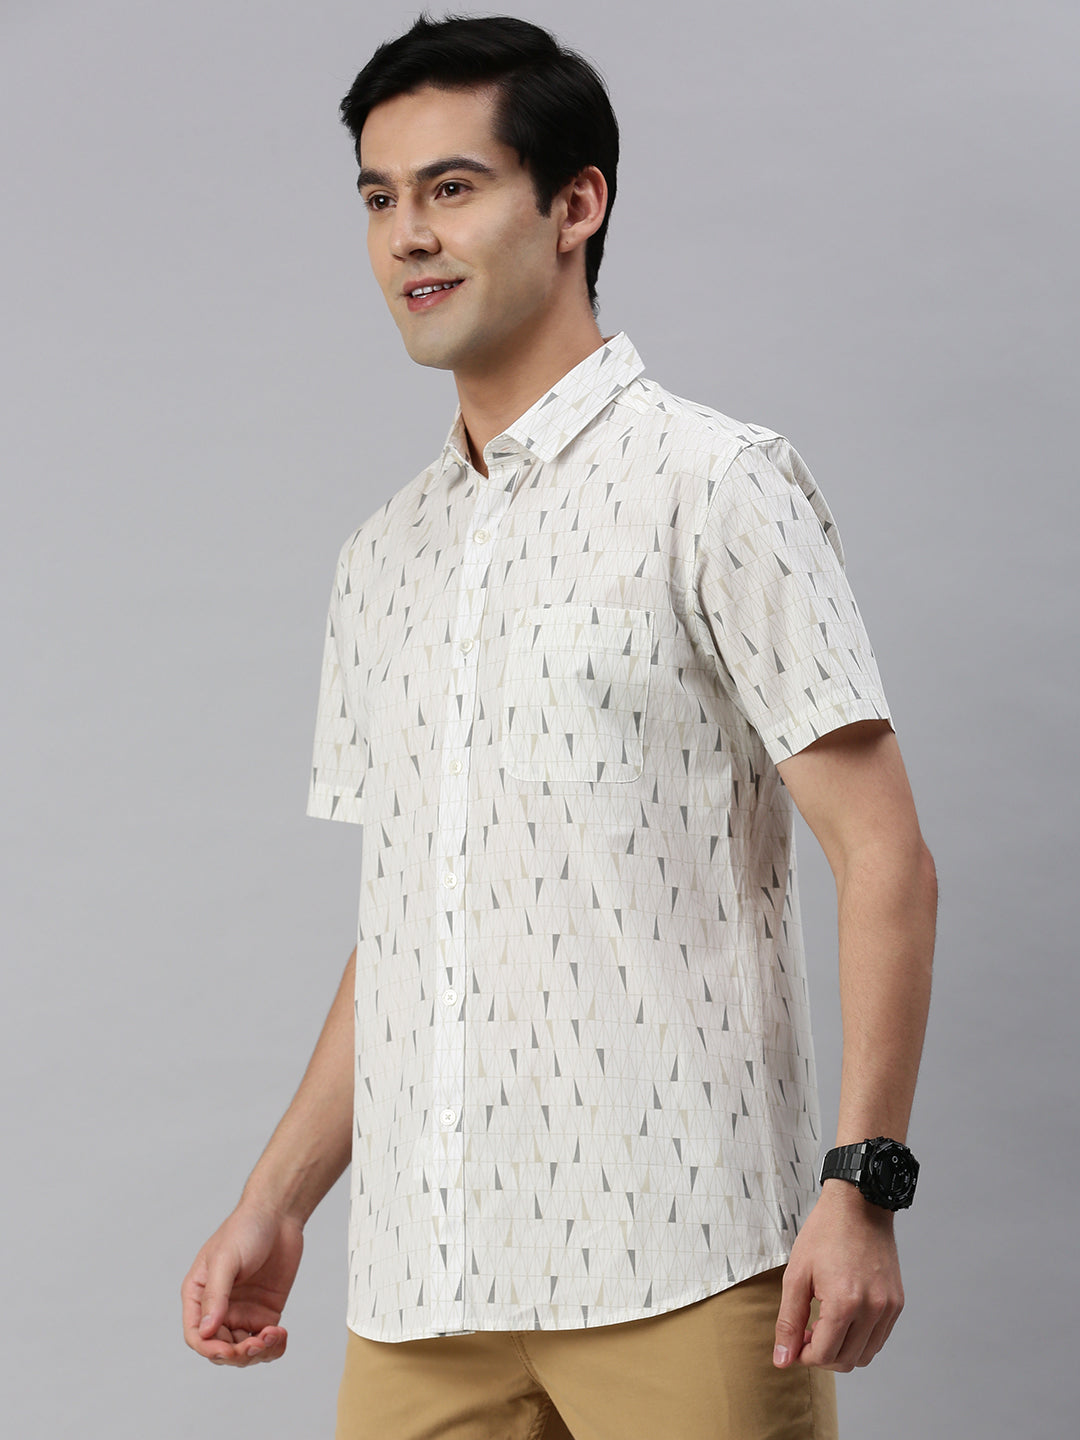 Classic Polo Men's Cotton Half Sleeve Printed Slim Fit Collar Neck White Color Woven Shirt | So1-150 A